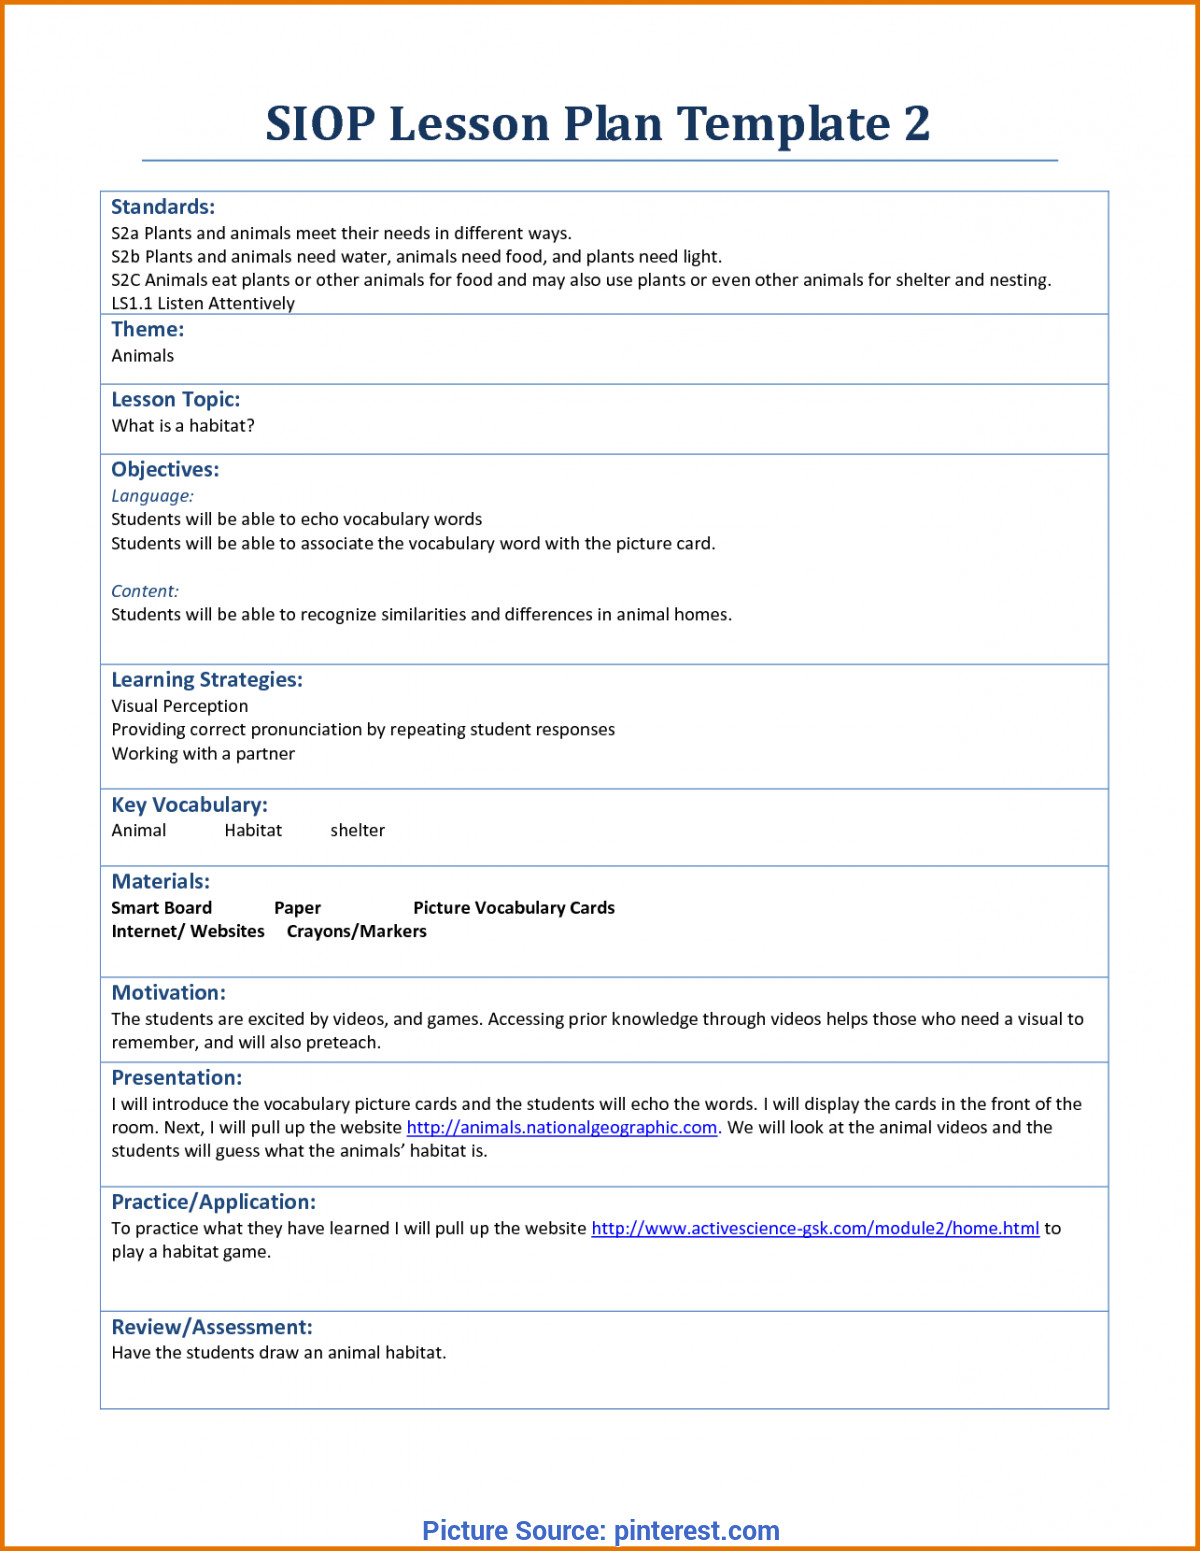 Siop Lesson Plan Examples Fresh Siop Lesson Plan Template 3 Example Siop Lesson Plan